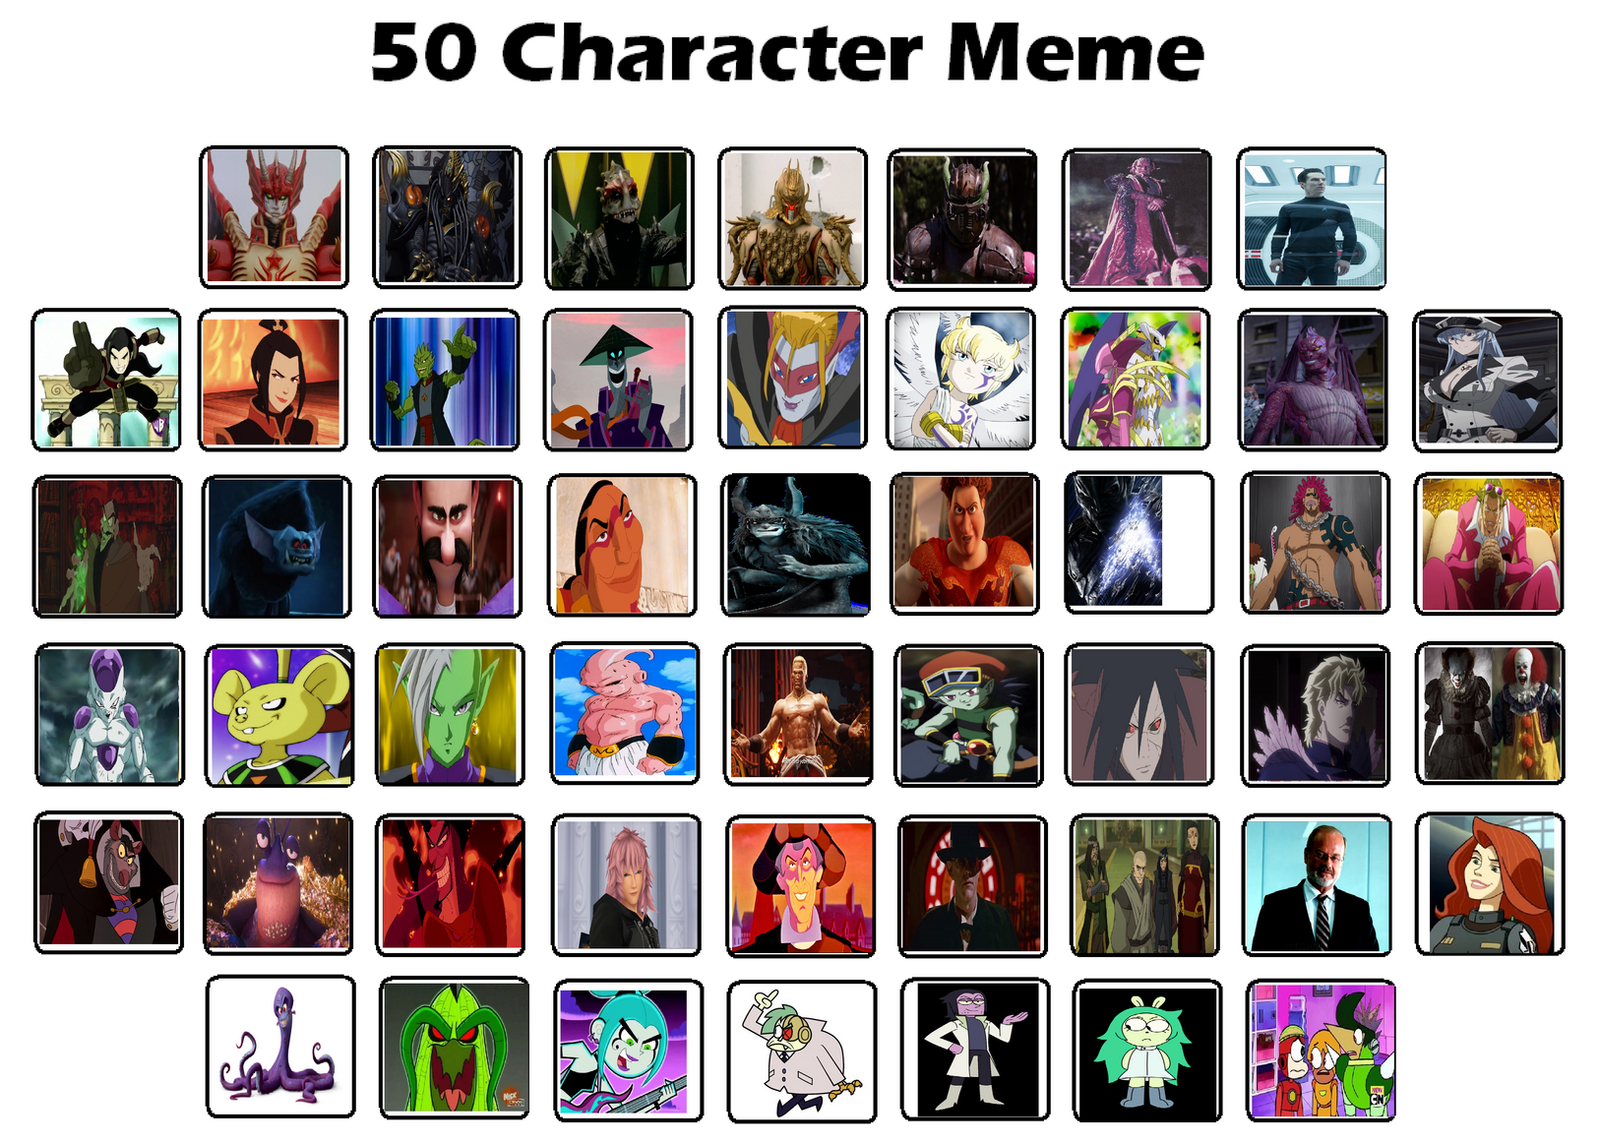 50 Villain Characters by Dragonprince18 on DeviantArt